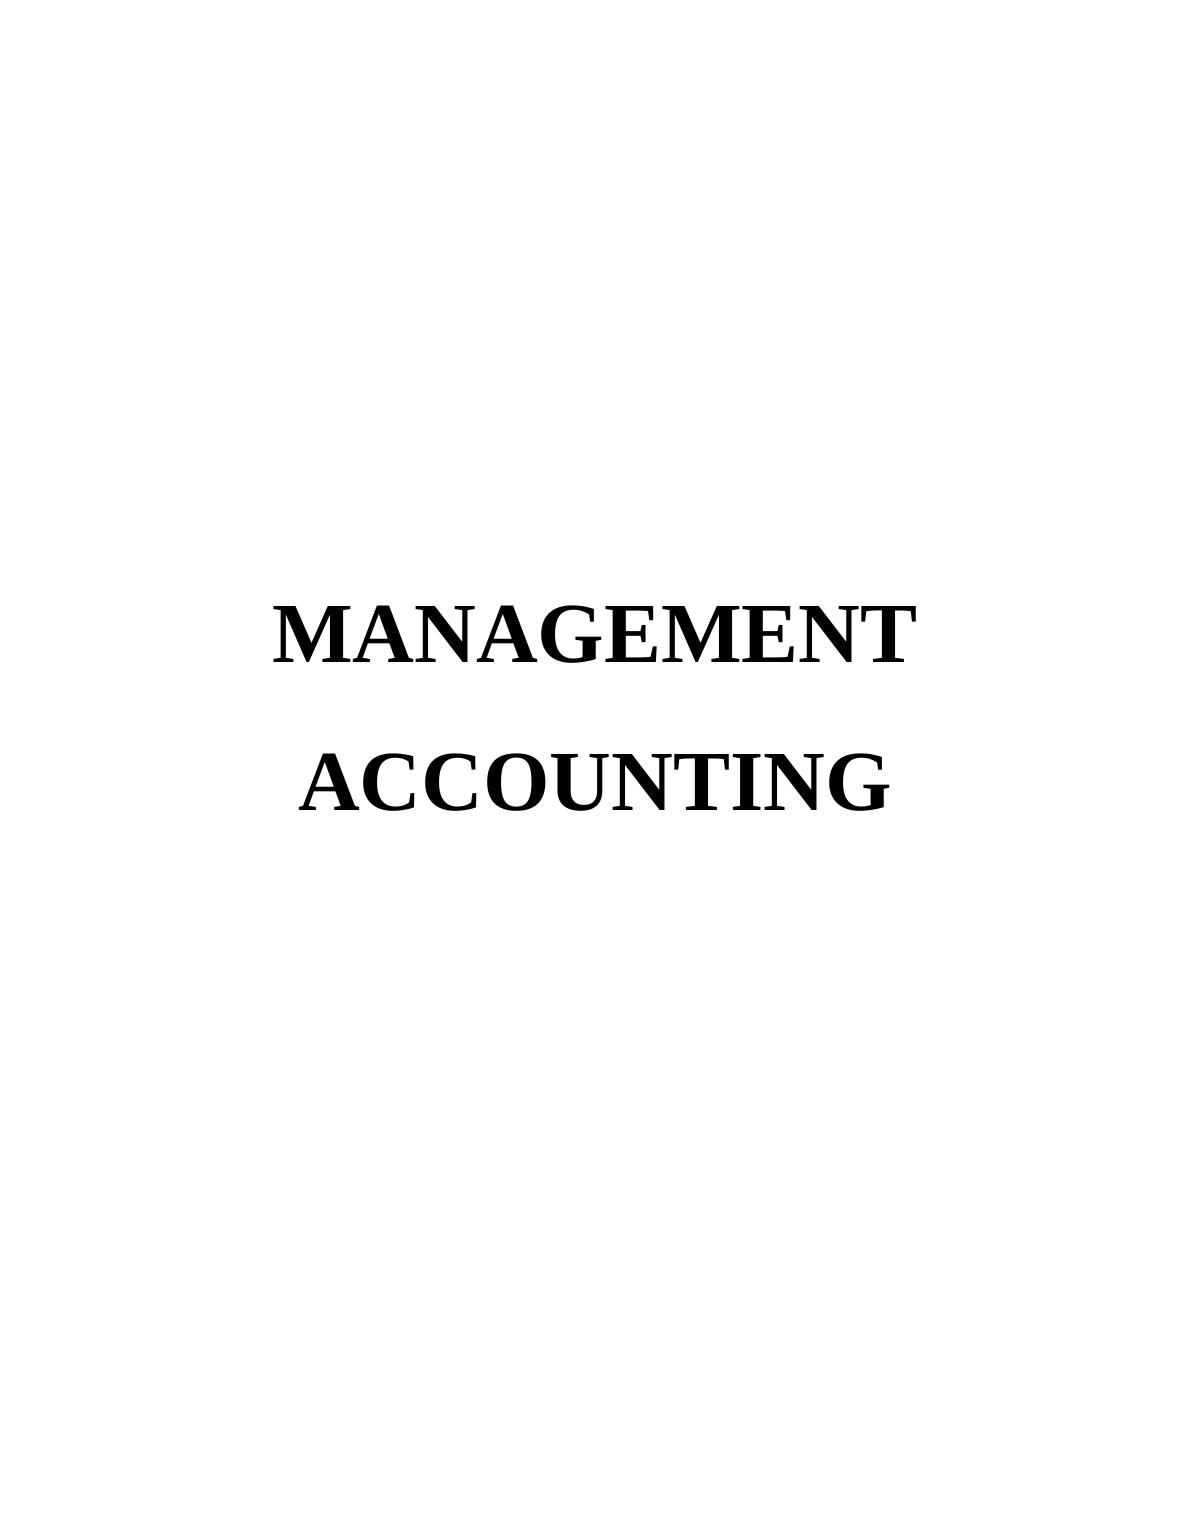 Management Accounting - Pavestone Assignment_1